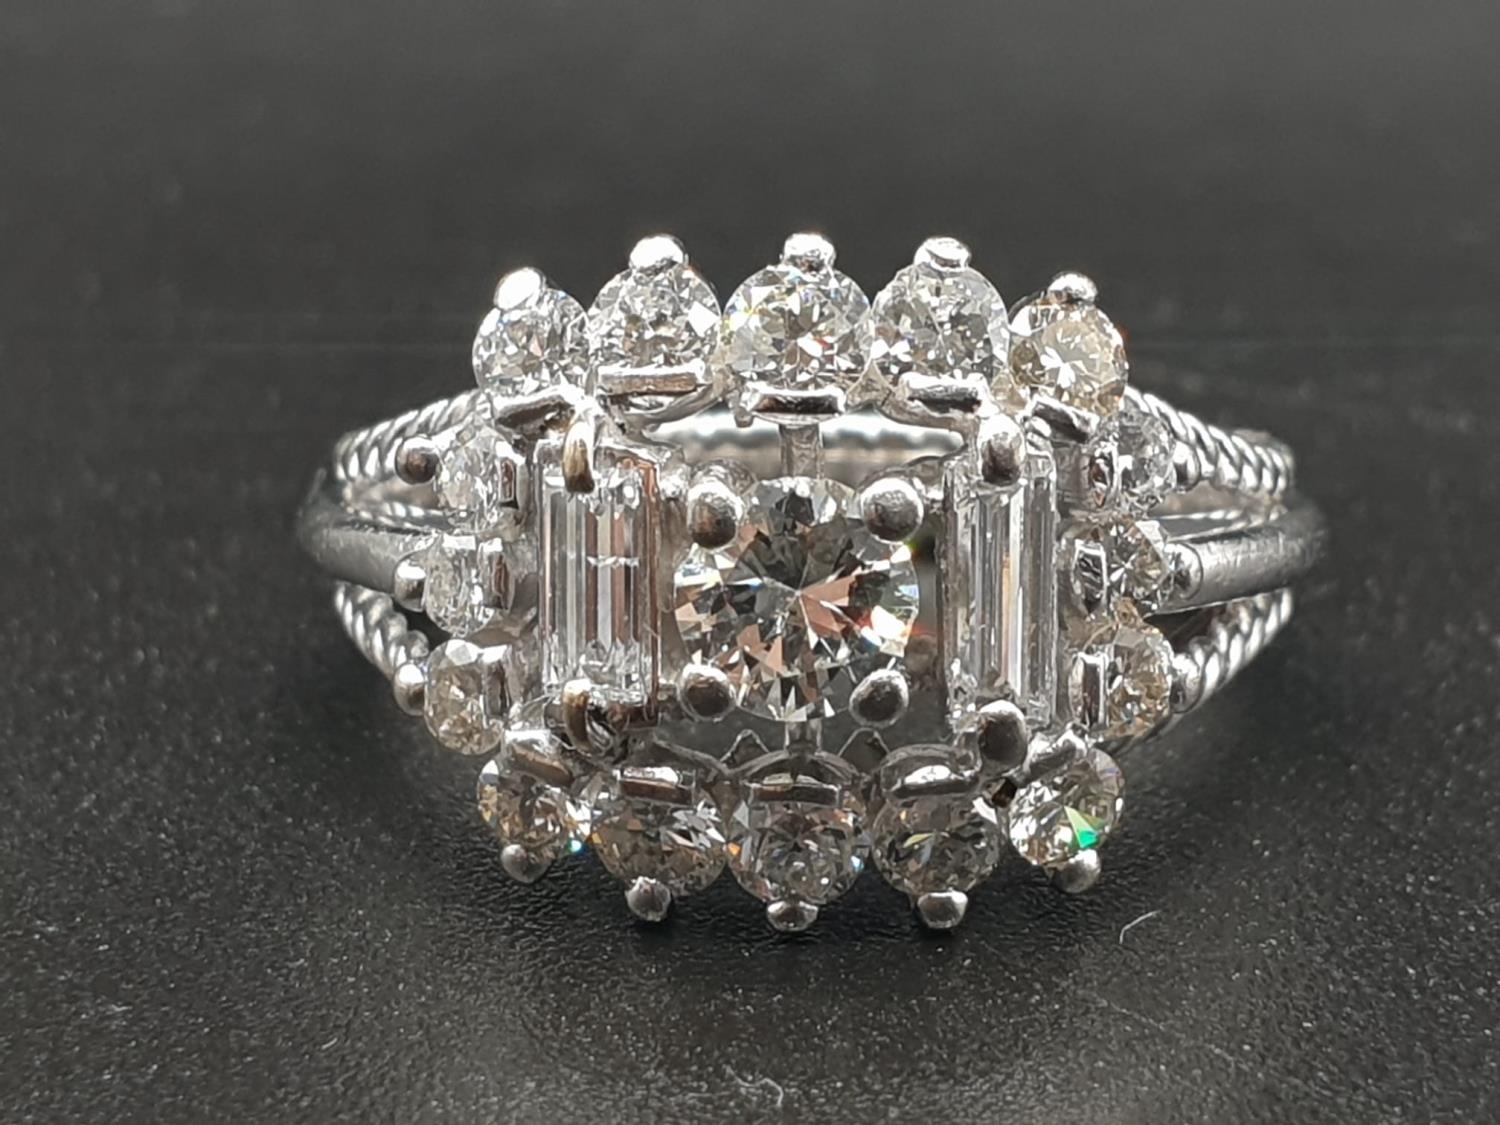 An 18 K (hallmarked) white gold ring with baguettes and brilliant cut diamonds. Ring size: O,